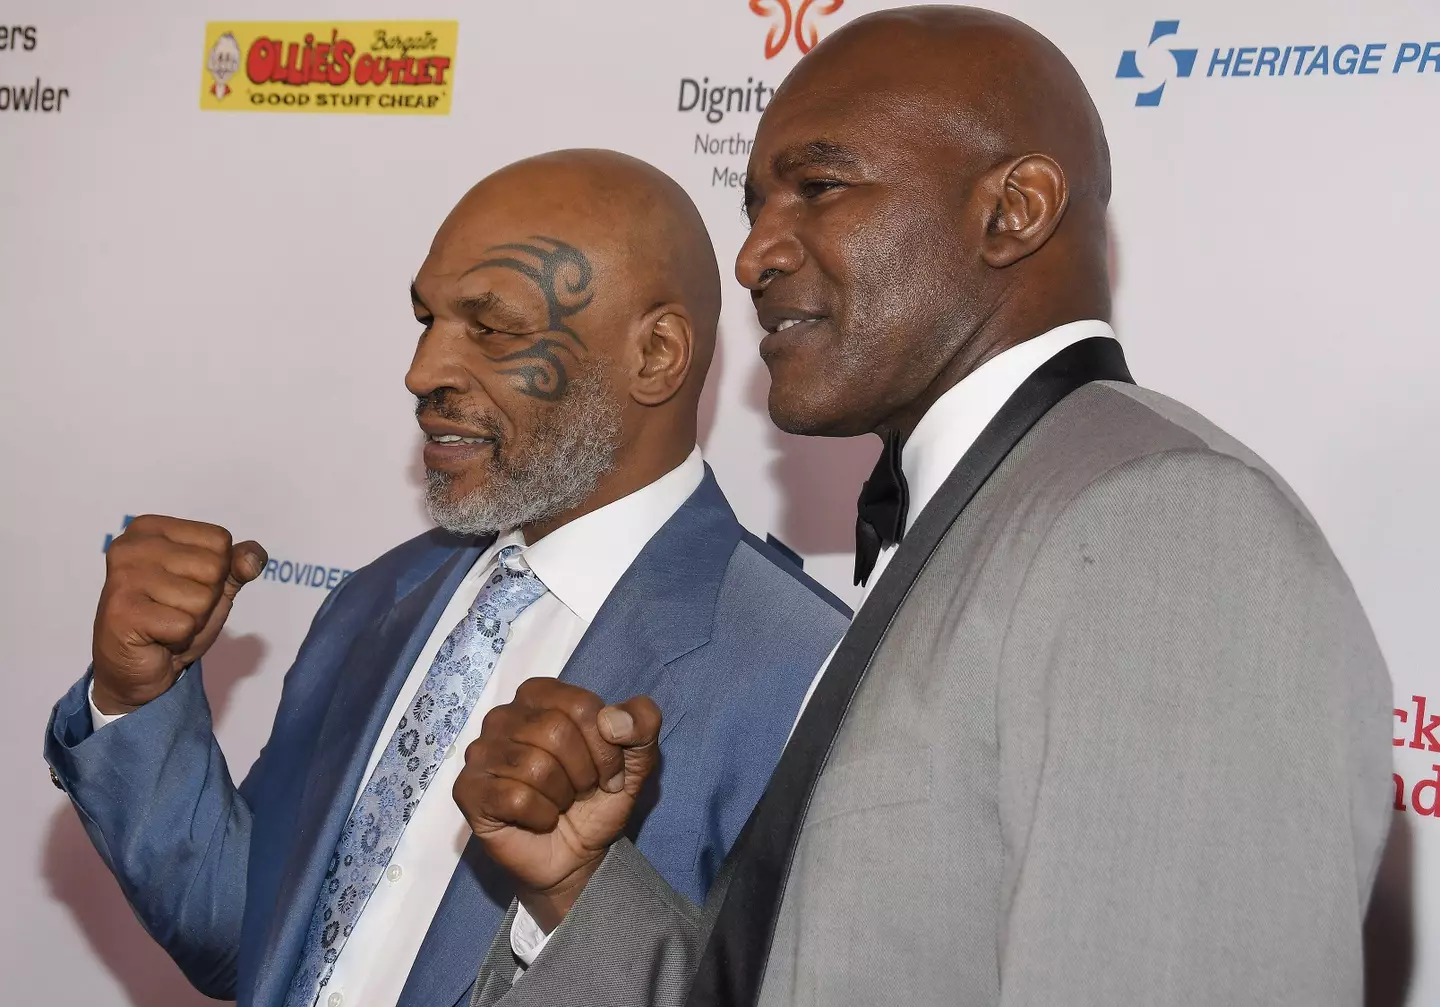 Tyson and Holyfield pictured in 2019. (Image